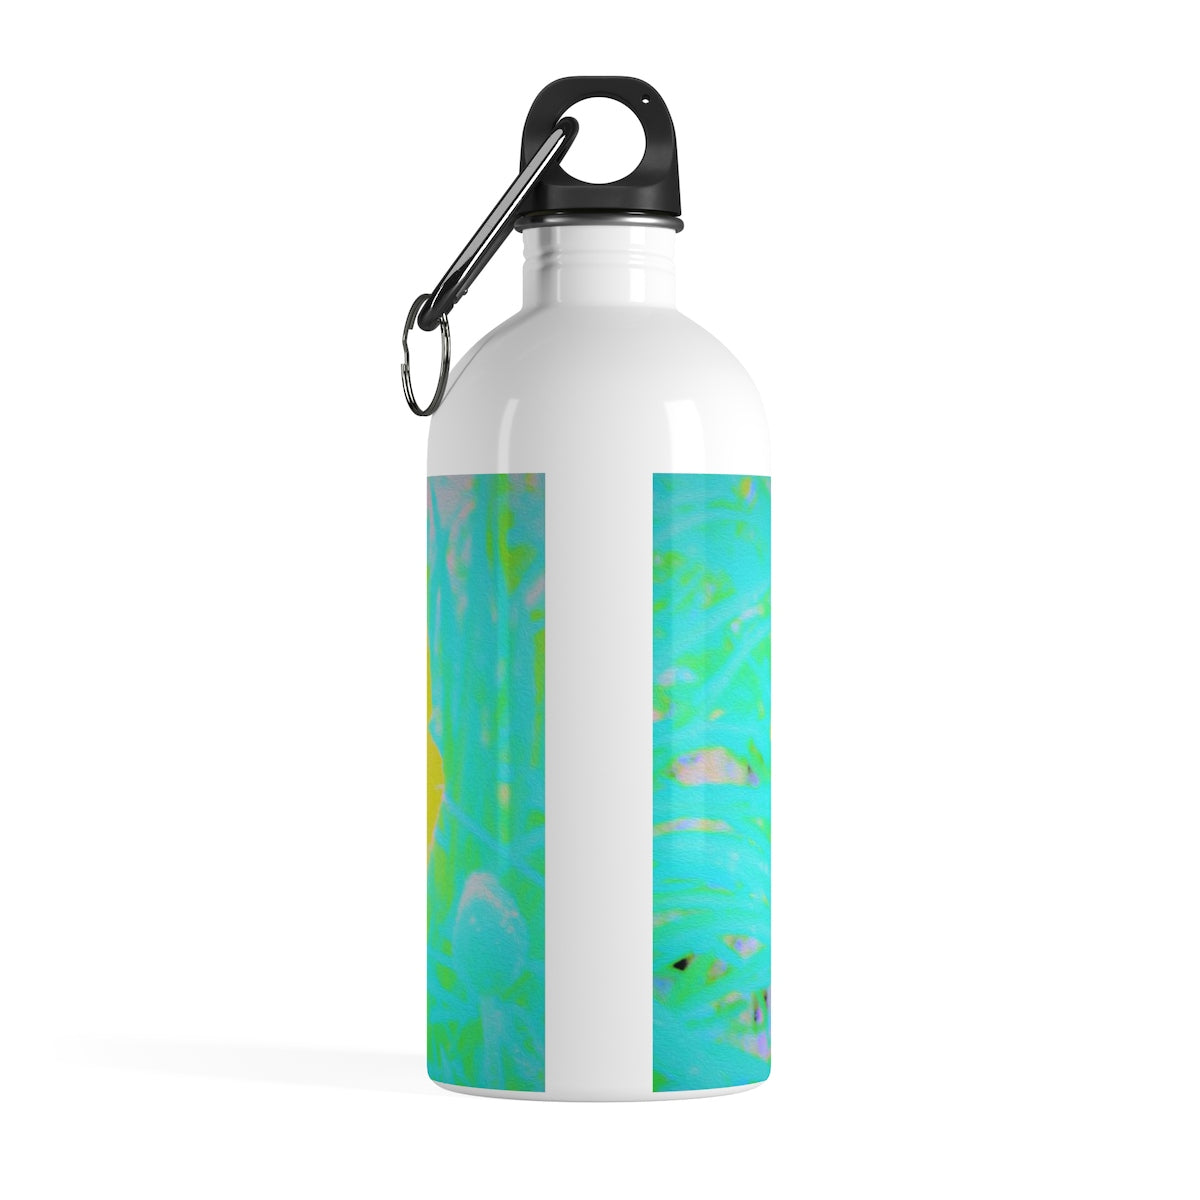 Stainless Steel Water Bottle, Yellow Poppy with Hot Pink Center on Turquoise